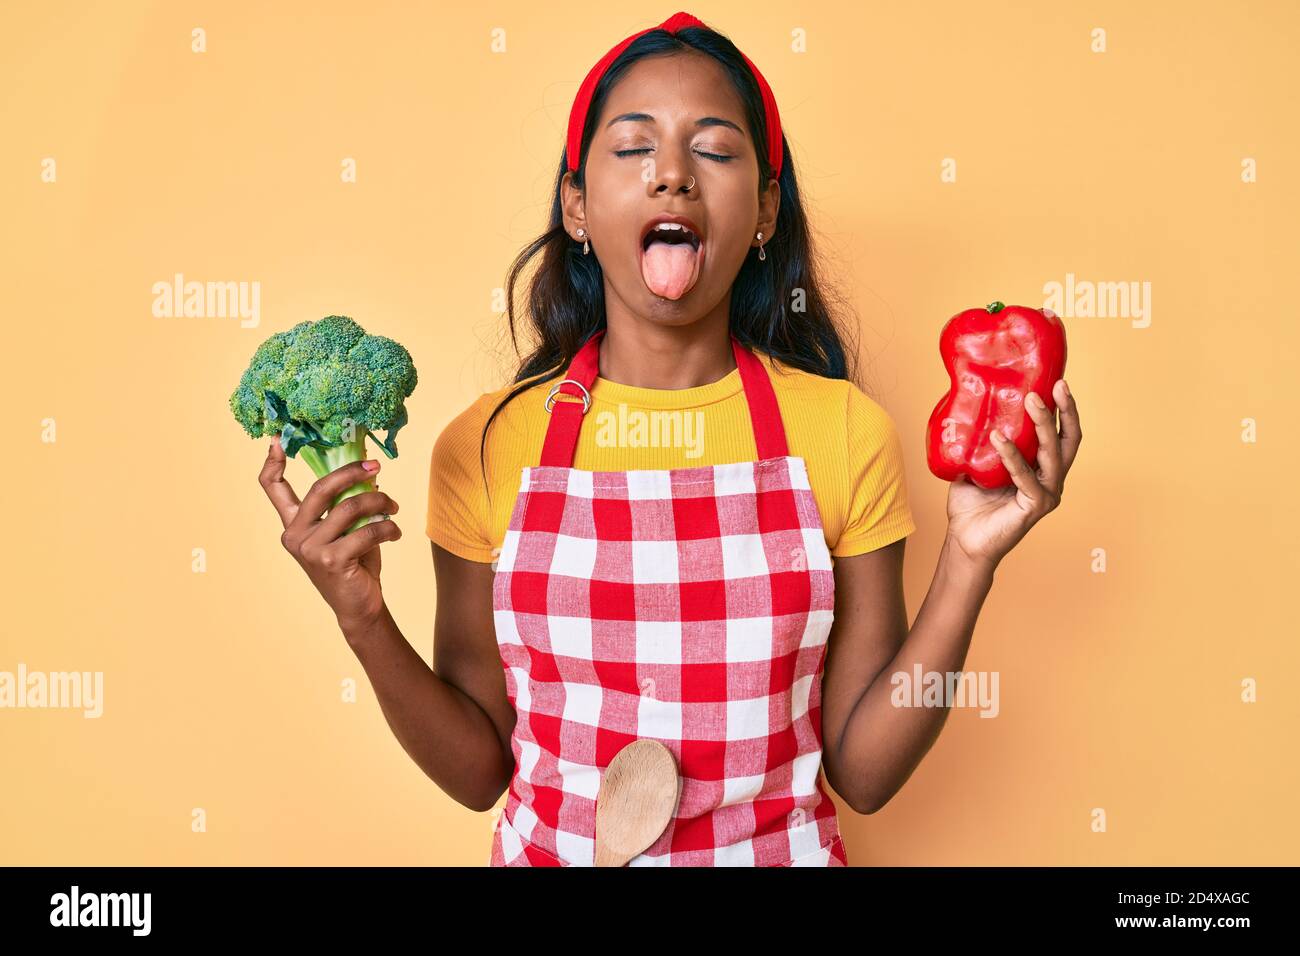 Young indian girl wearing apron holding broccoli and red pepper sticking tongue out happy with funny expression. Stock Photo